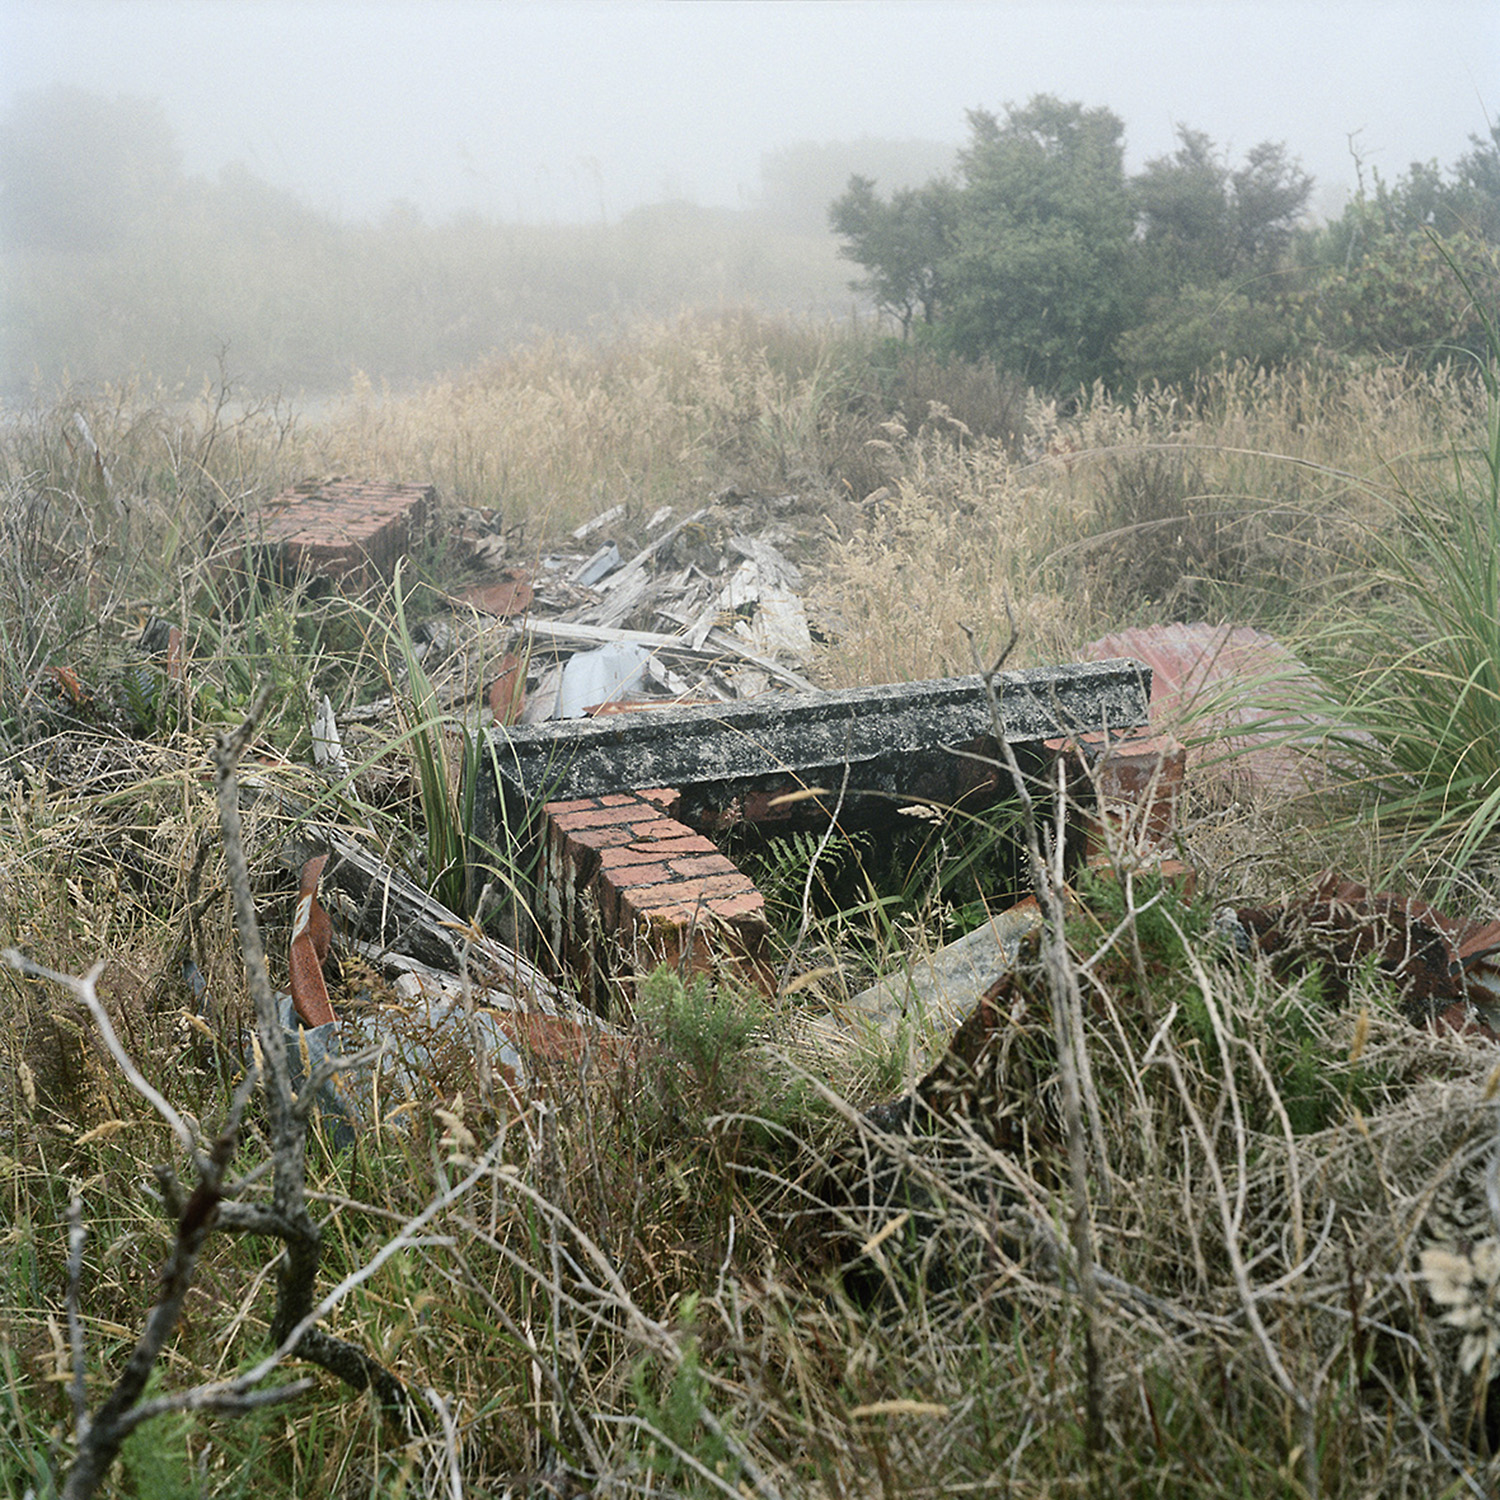  Caroline McQuarrie,  Remains of private residence,  Denniston, January 2013, from  No Town   